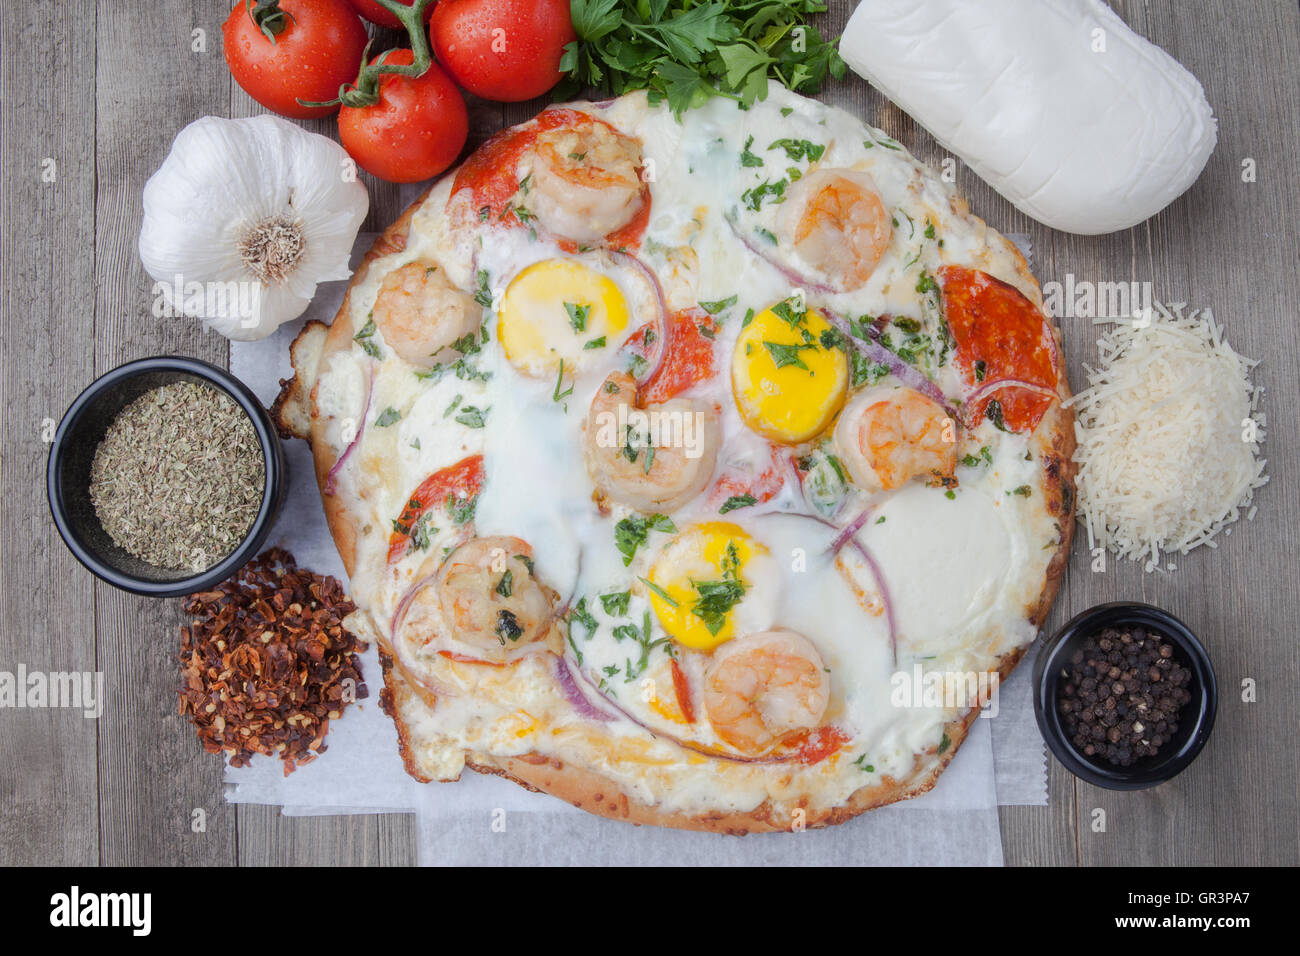 Egg pizza with fresh mozzarella and ingredients tomatoes shrimp green pepper Stock Photo